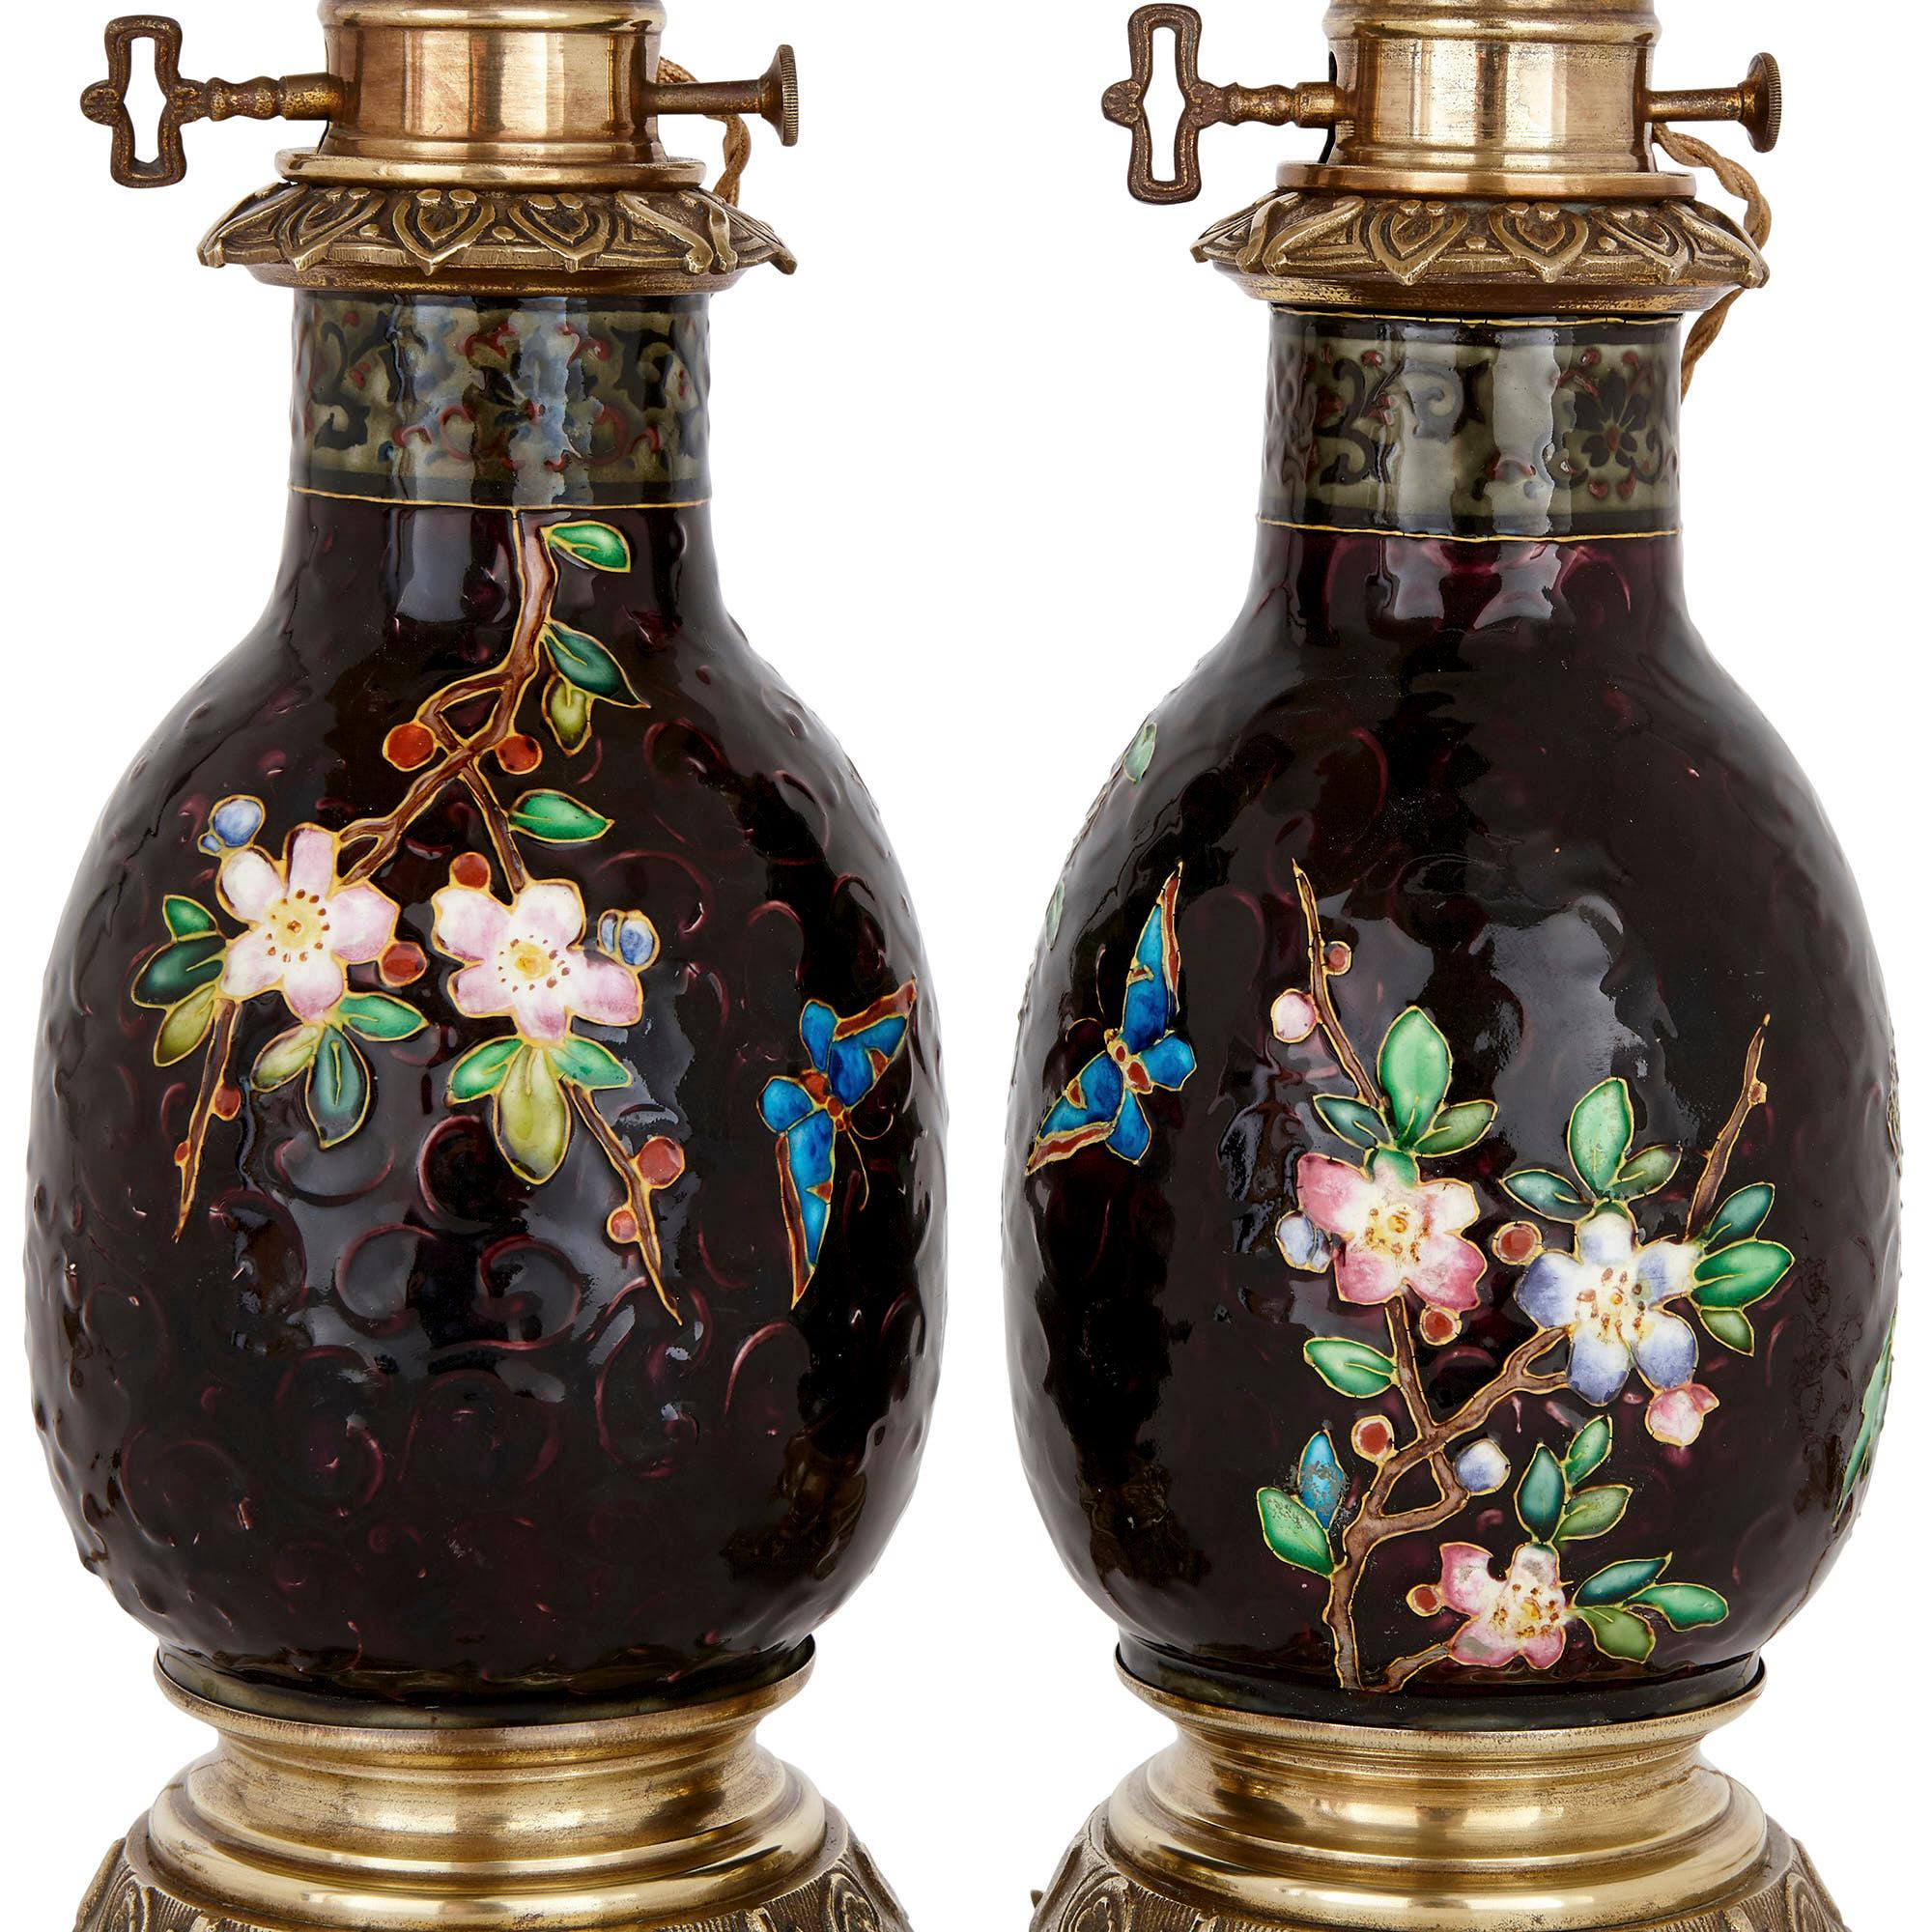 These wonderful oil lamps have been attributed to the prestigious ceramic company, Viellard & Cie. The firm was established in 1845 in Bordeaux, France. It was directed by Jules Vielliard in partnership with his two sons, Albert and Charles. These